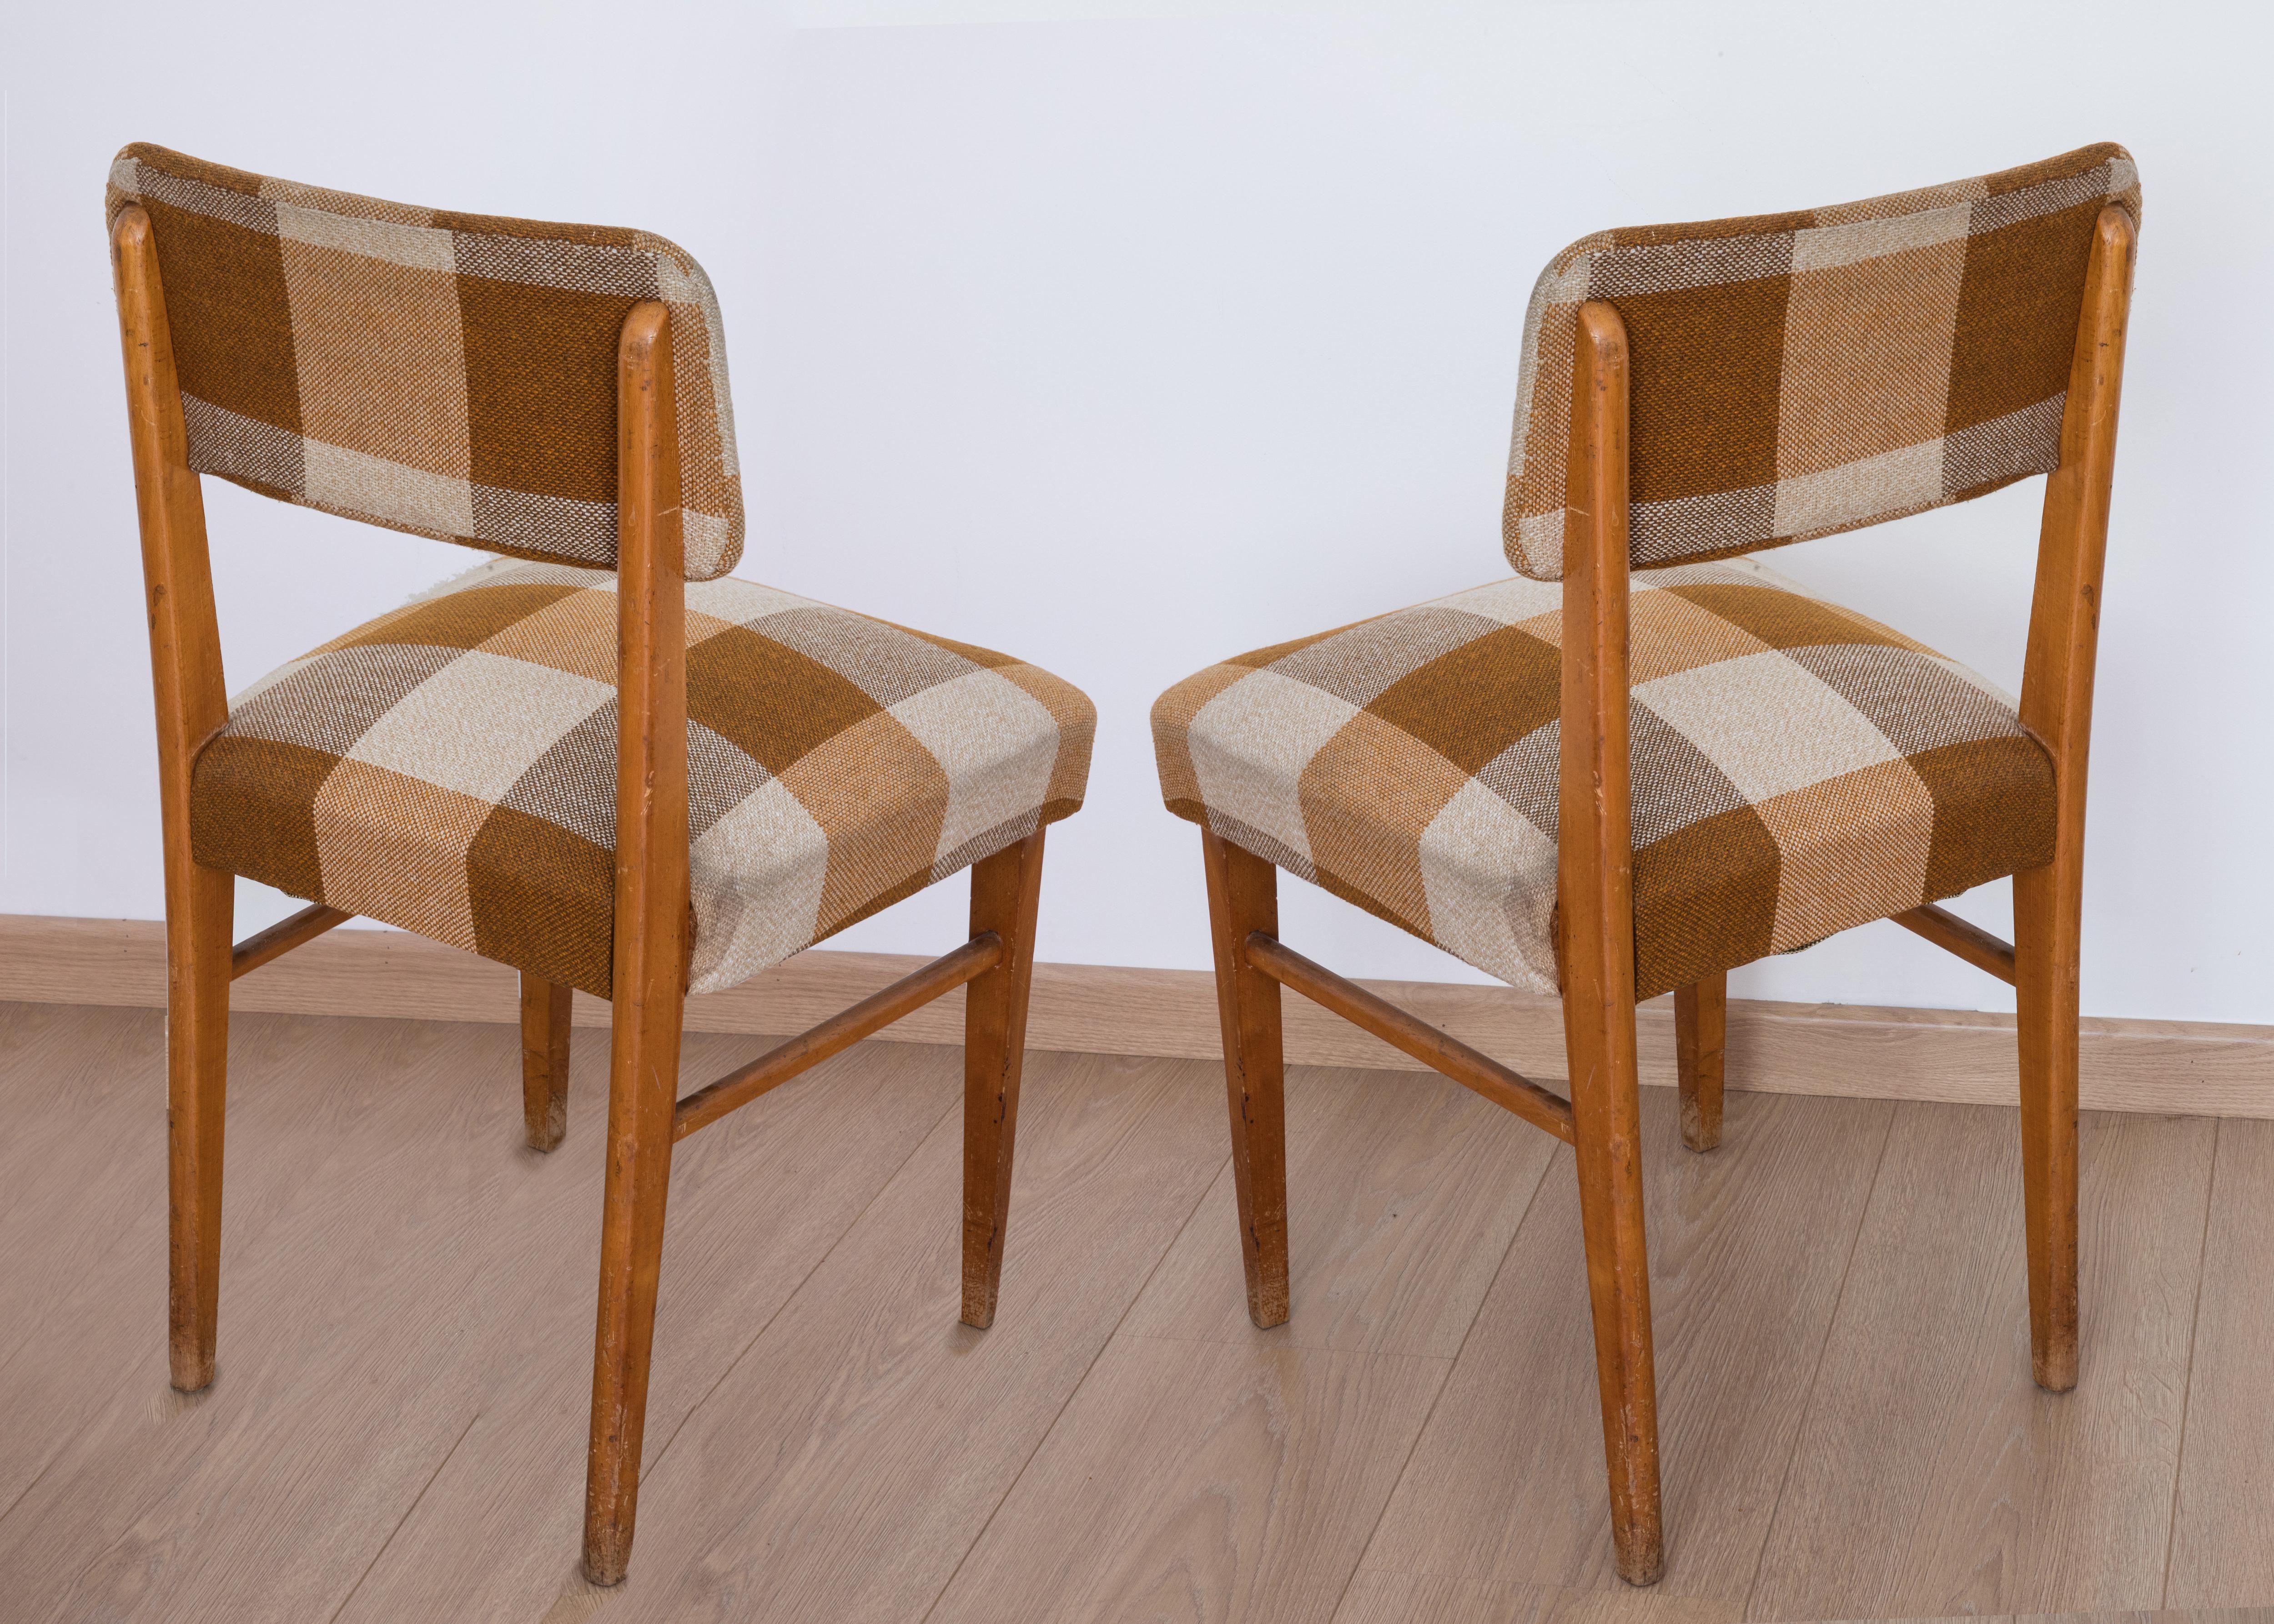 pair of original 1950s chairs. with wooden structure and seat covered in fabric. total 85 cm, depth 48 cm, width 44 cm, approx. Italian Design probably Anonima Castelli Bologna.